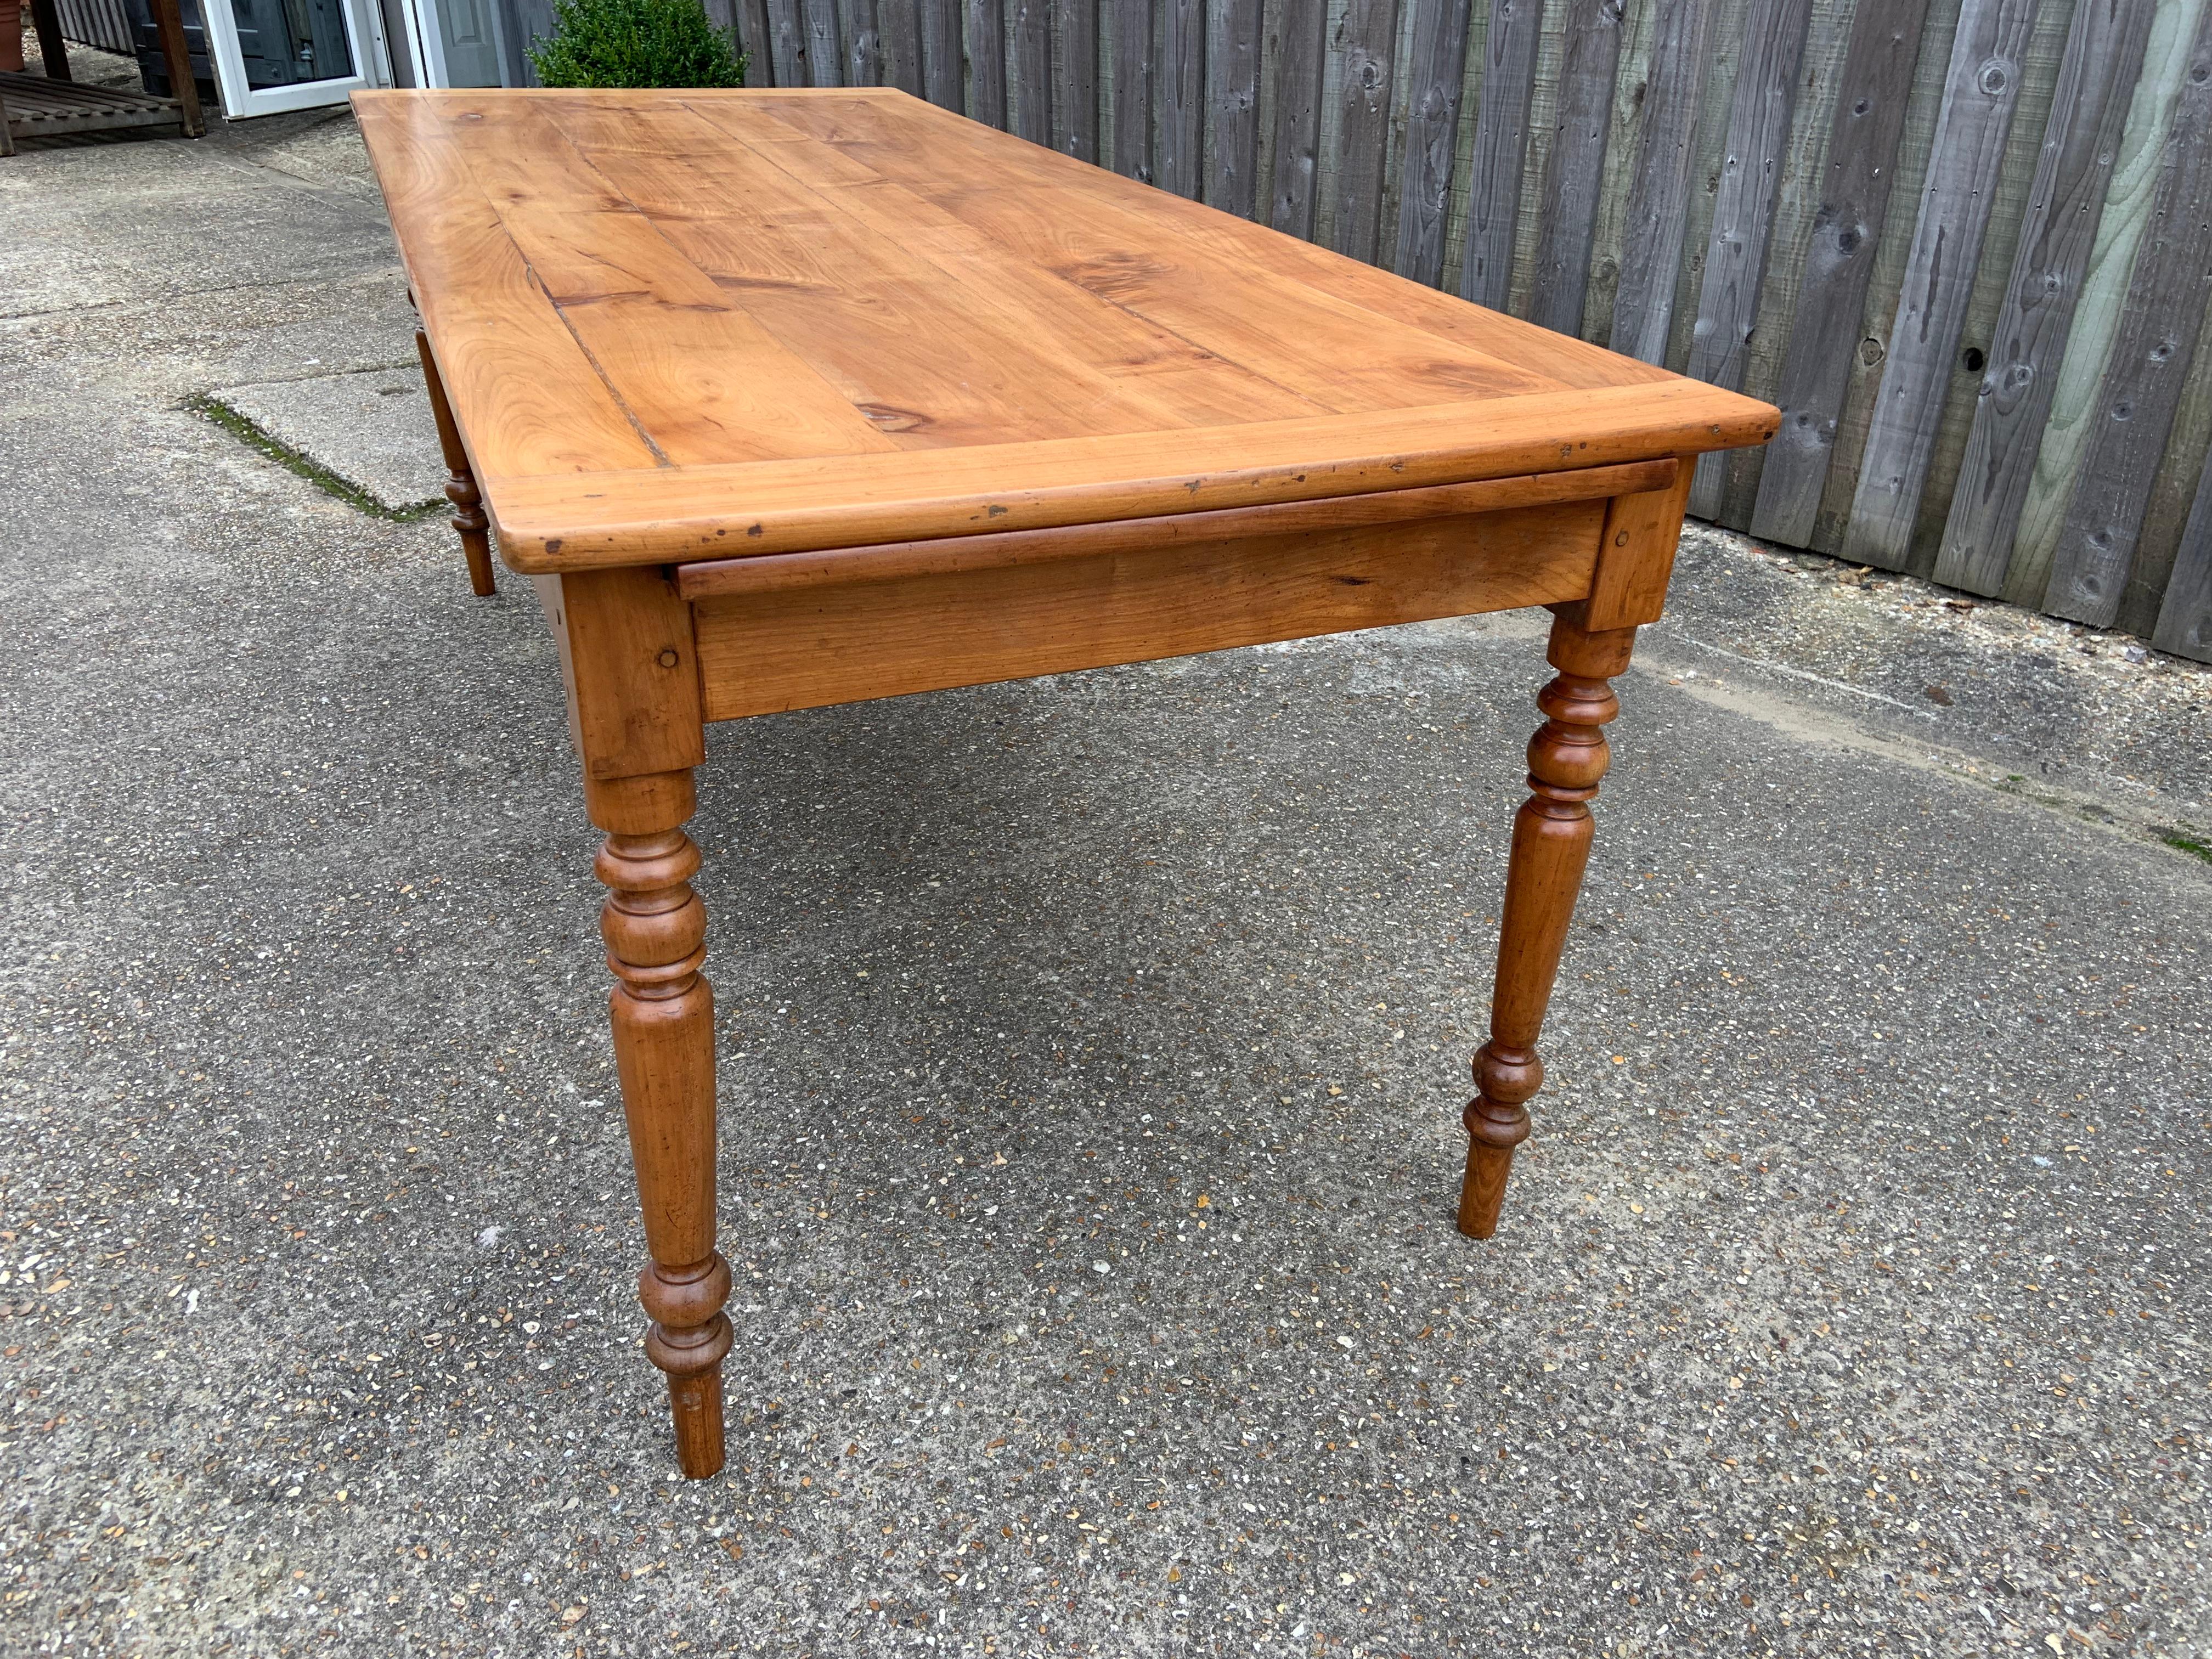 Late 19th Century Cherry Farmhouse Table with good size bread slide. Bread slide measurements 25.5 w x 17.5 l. Pale cherry top with gorgeous turned legs.